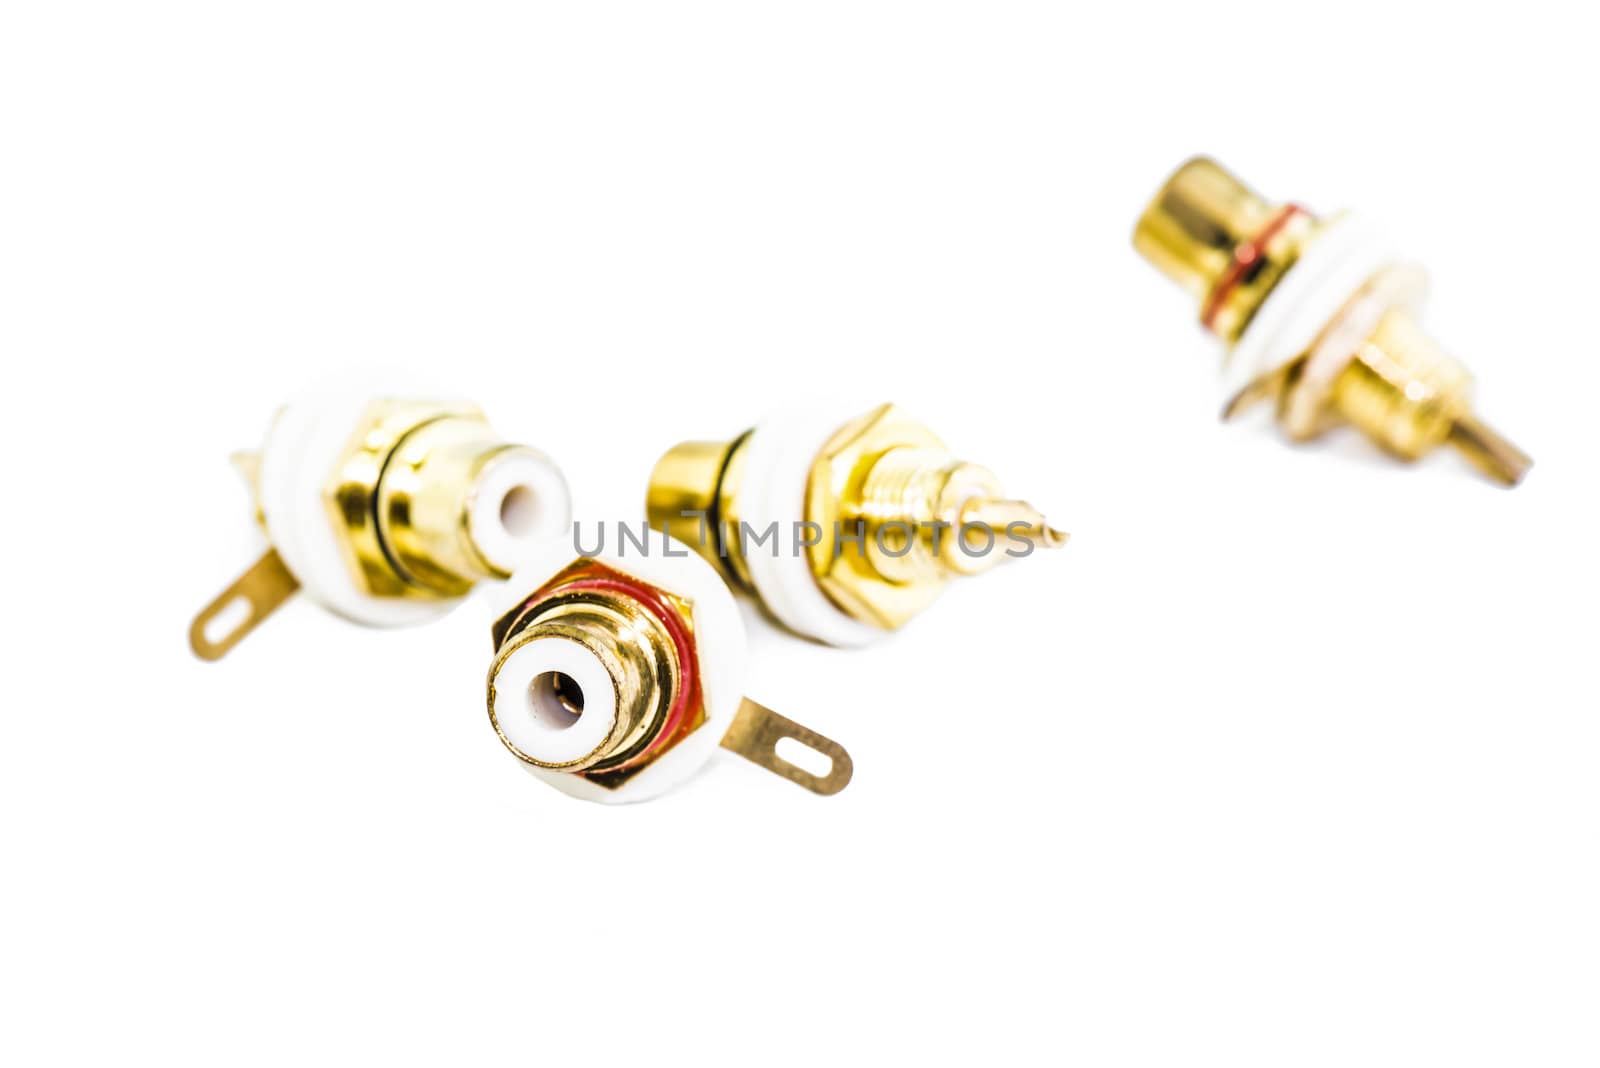 RCA connectors in the white background by wmitrmatr